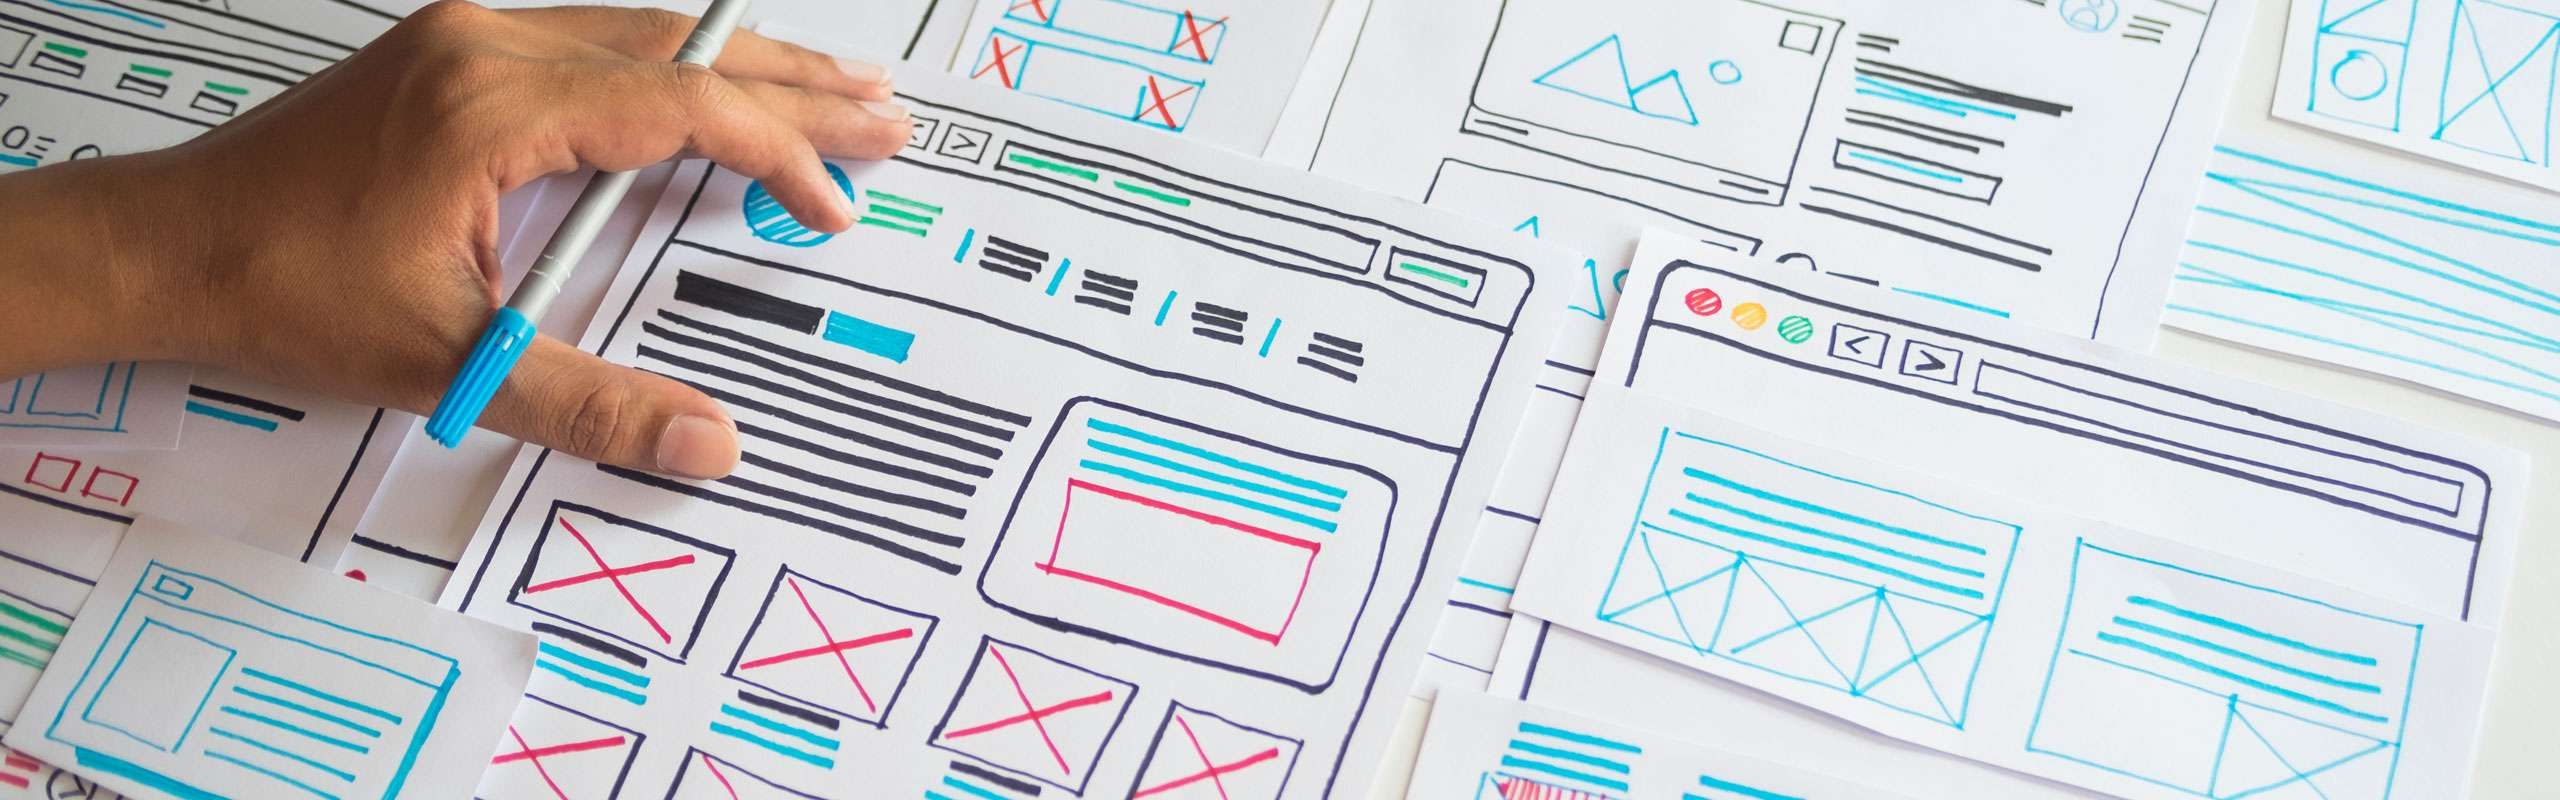 How to Tell if Your Website Needs a Redesign